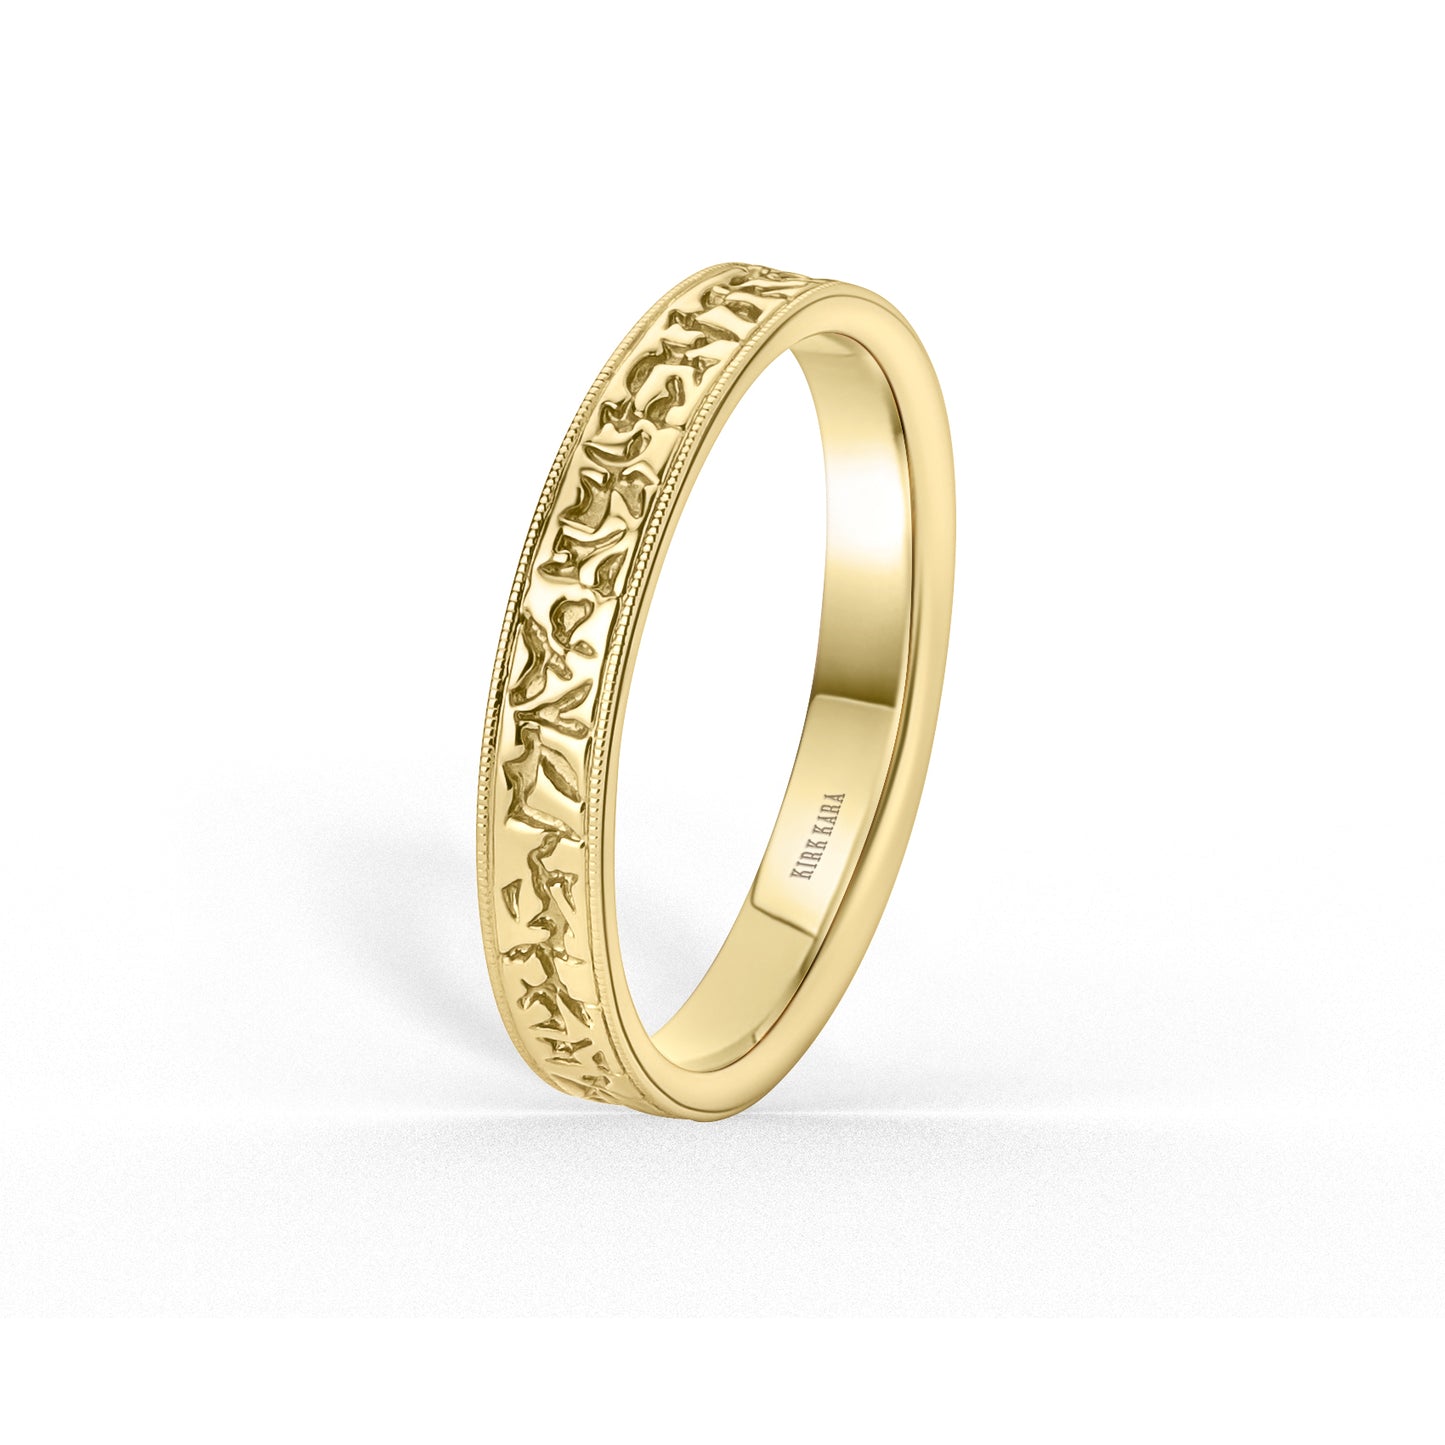 Thin Nugget Engraved Wedding Band, 3mm